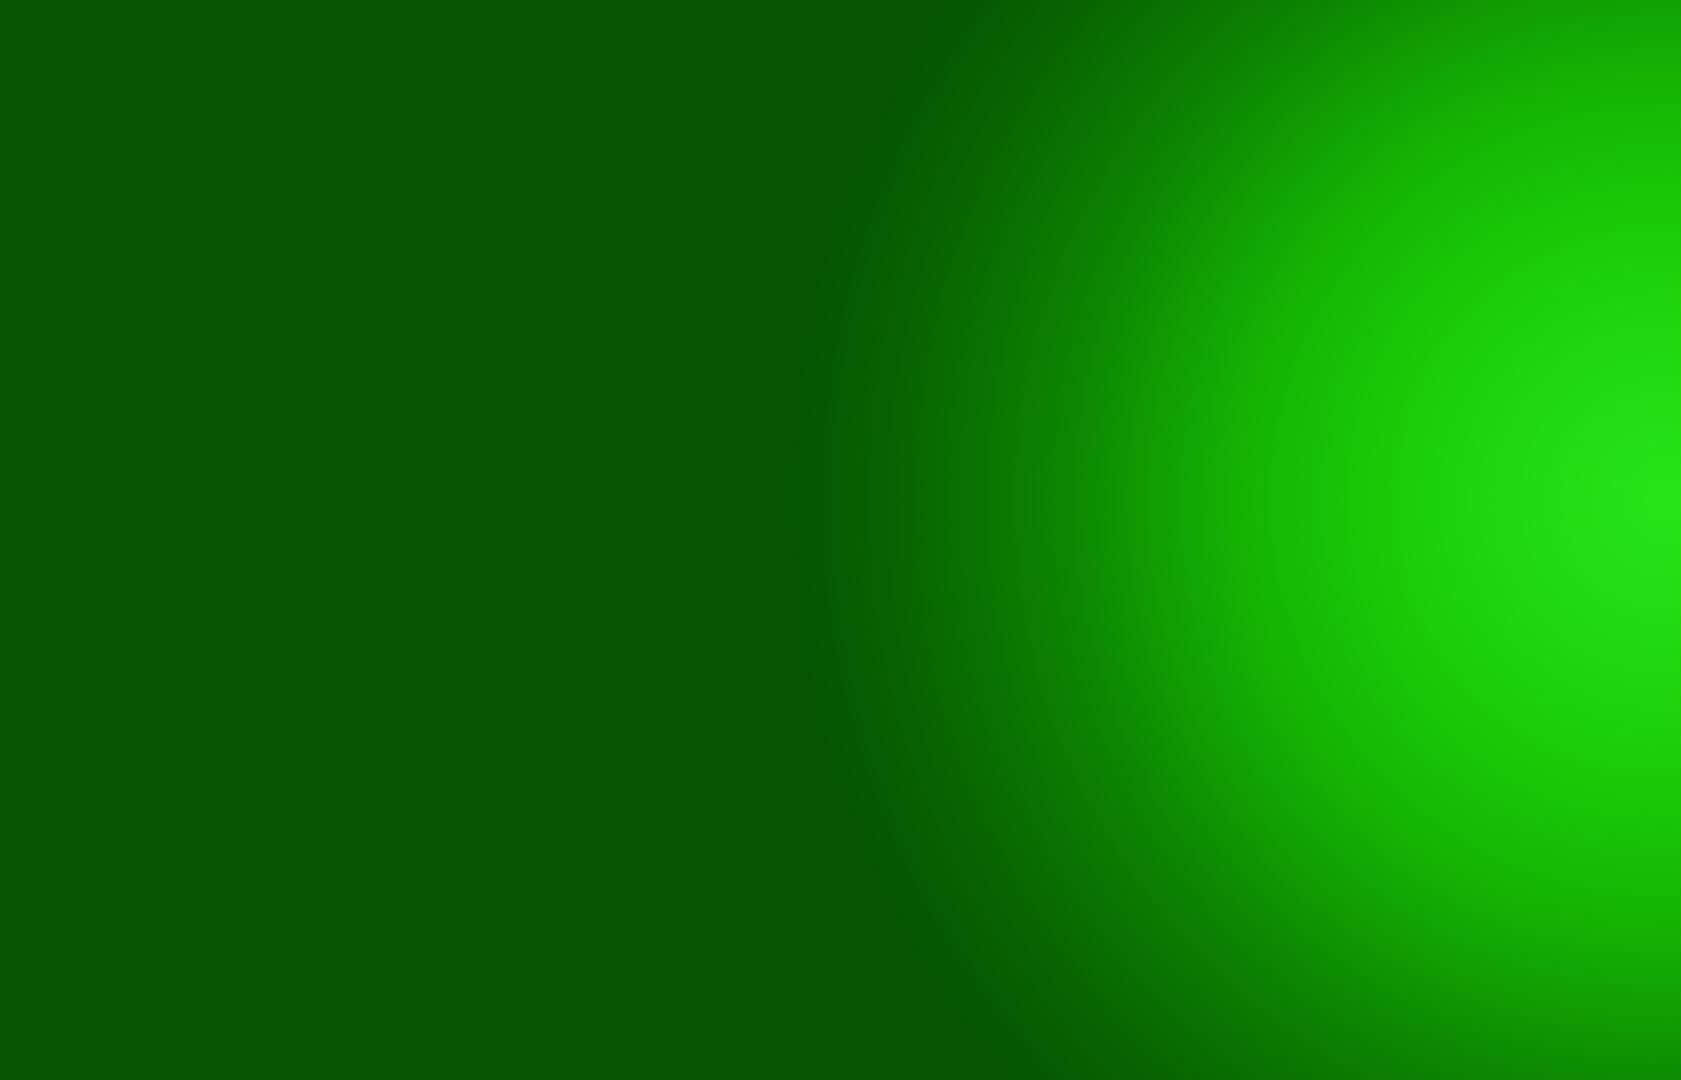 Green Background With A Light Shining On It